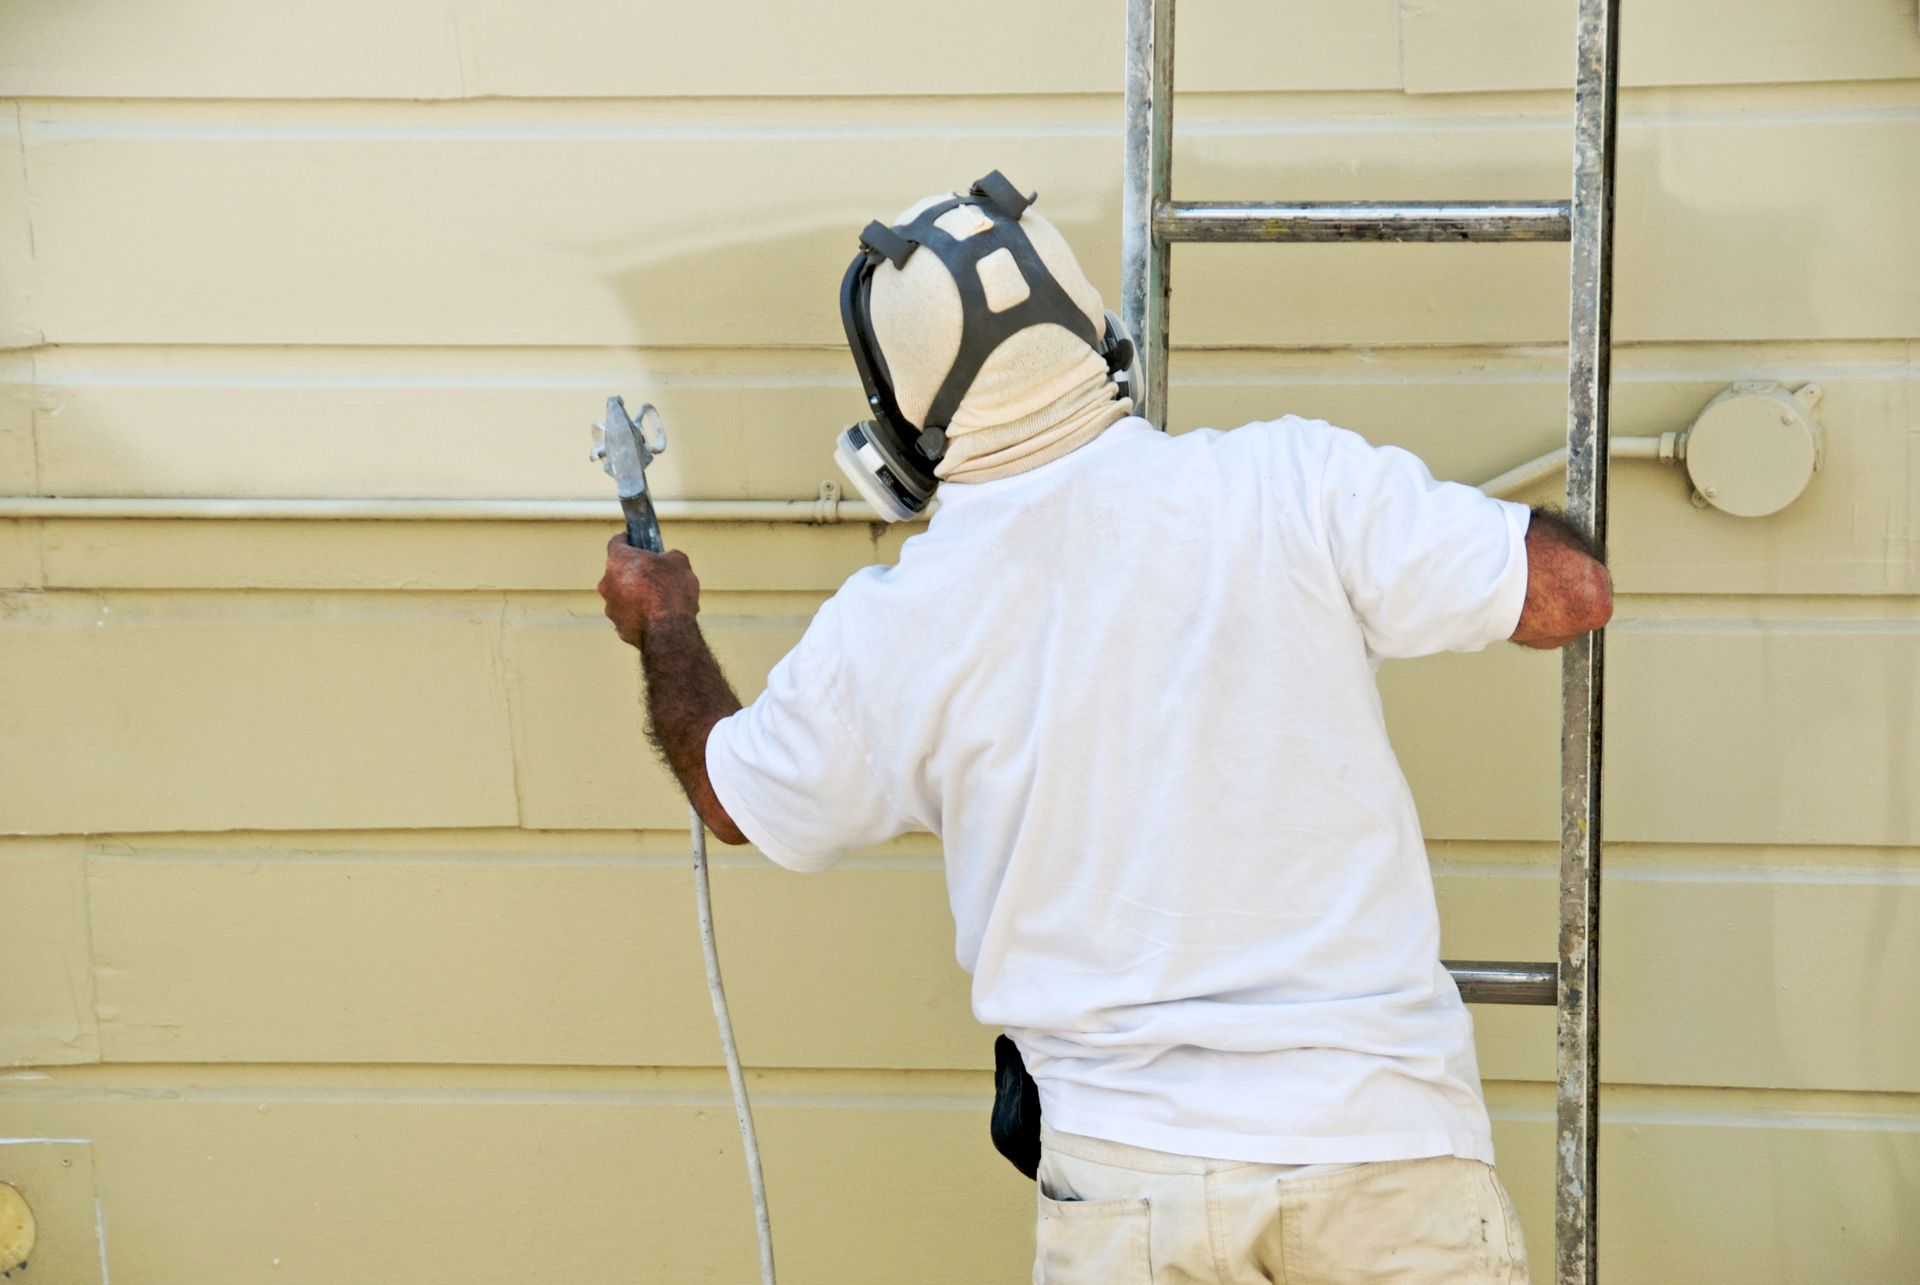 A skilled handyman on a ladder expertly operates a paint spray gun, applying a smooth coat of paint to the exterior surface.